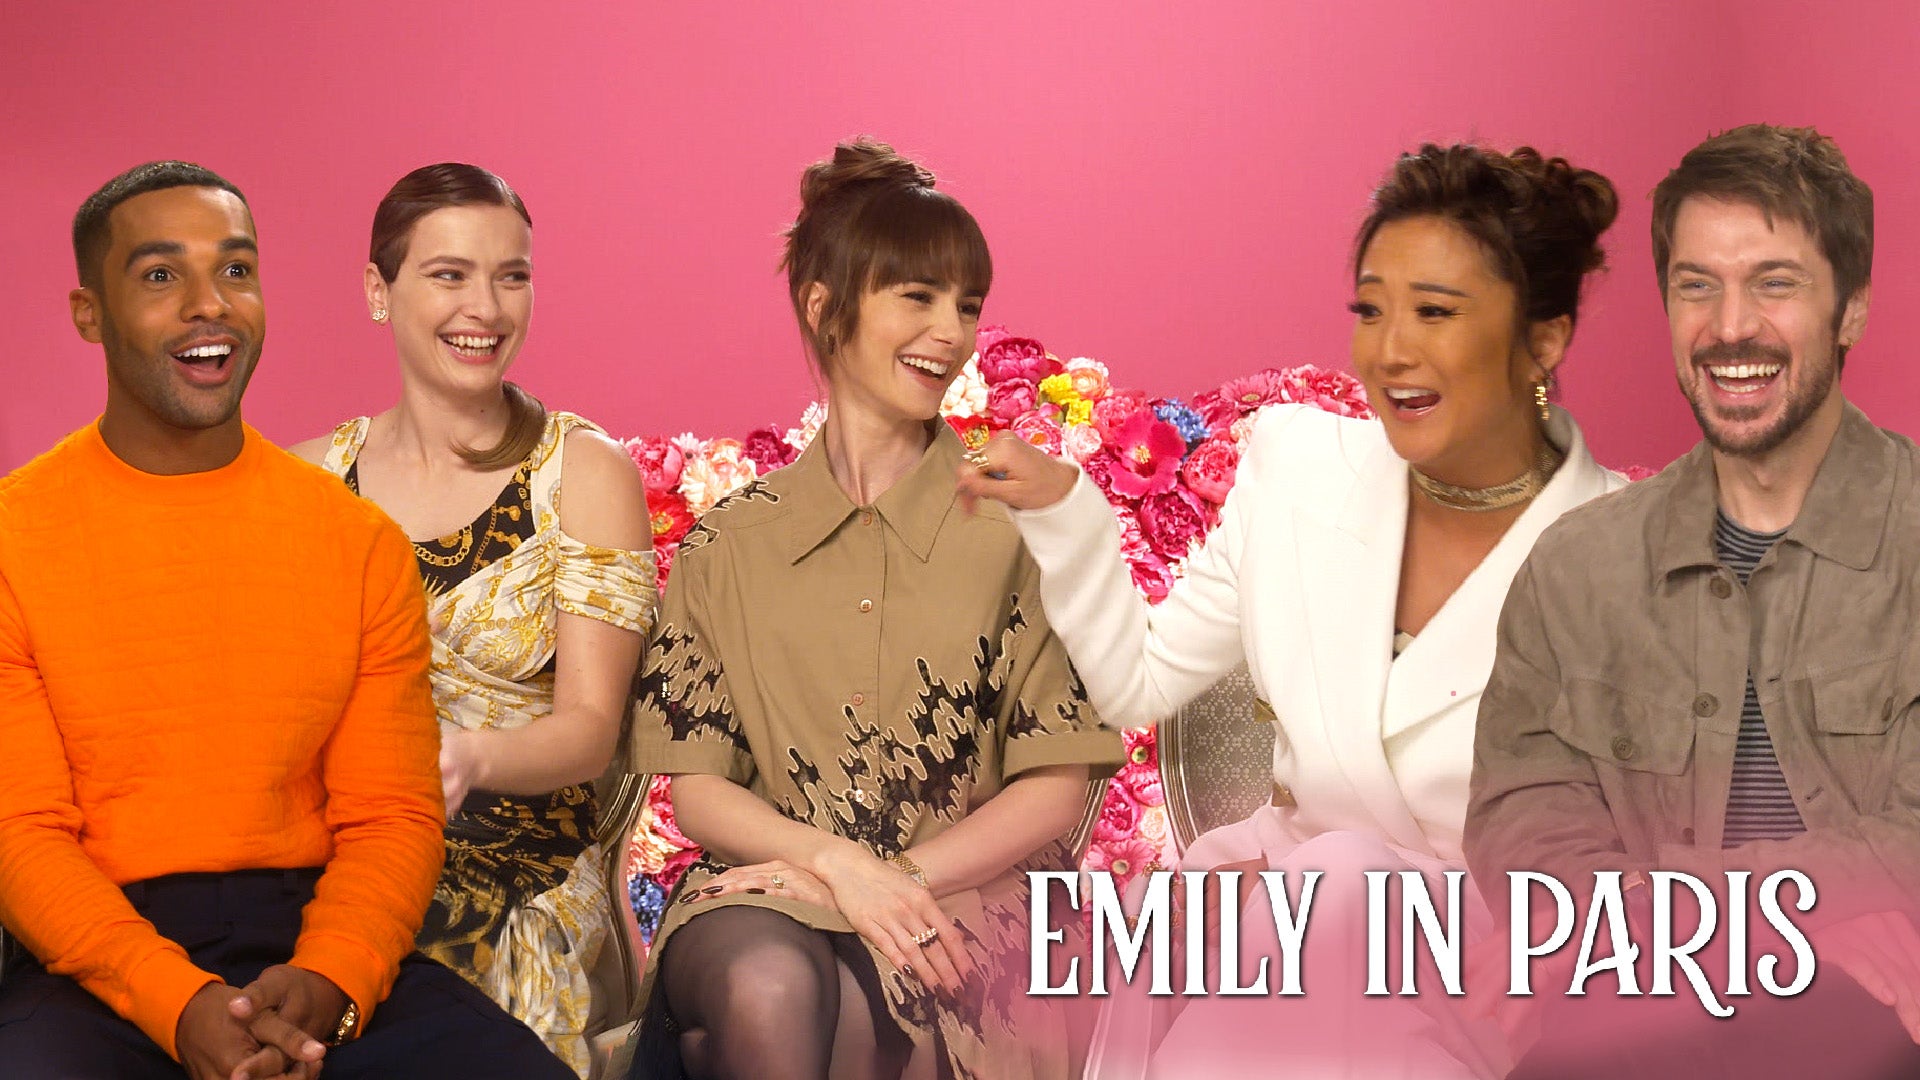 Emily in Paris': All the Bad Parts About Season 3